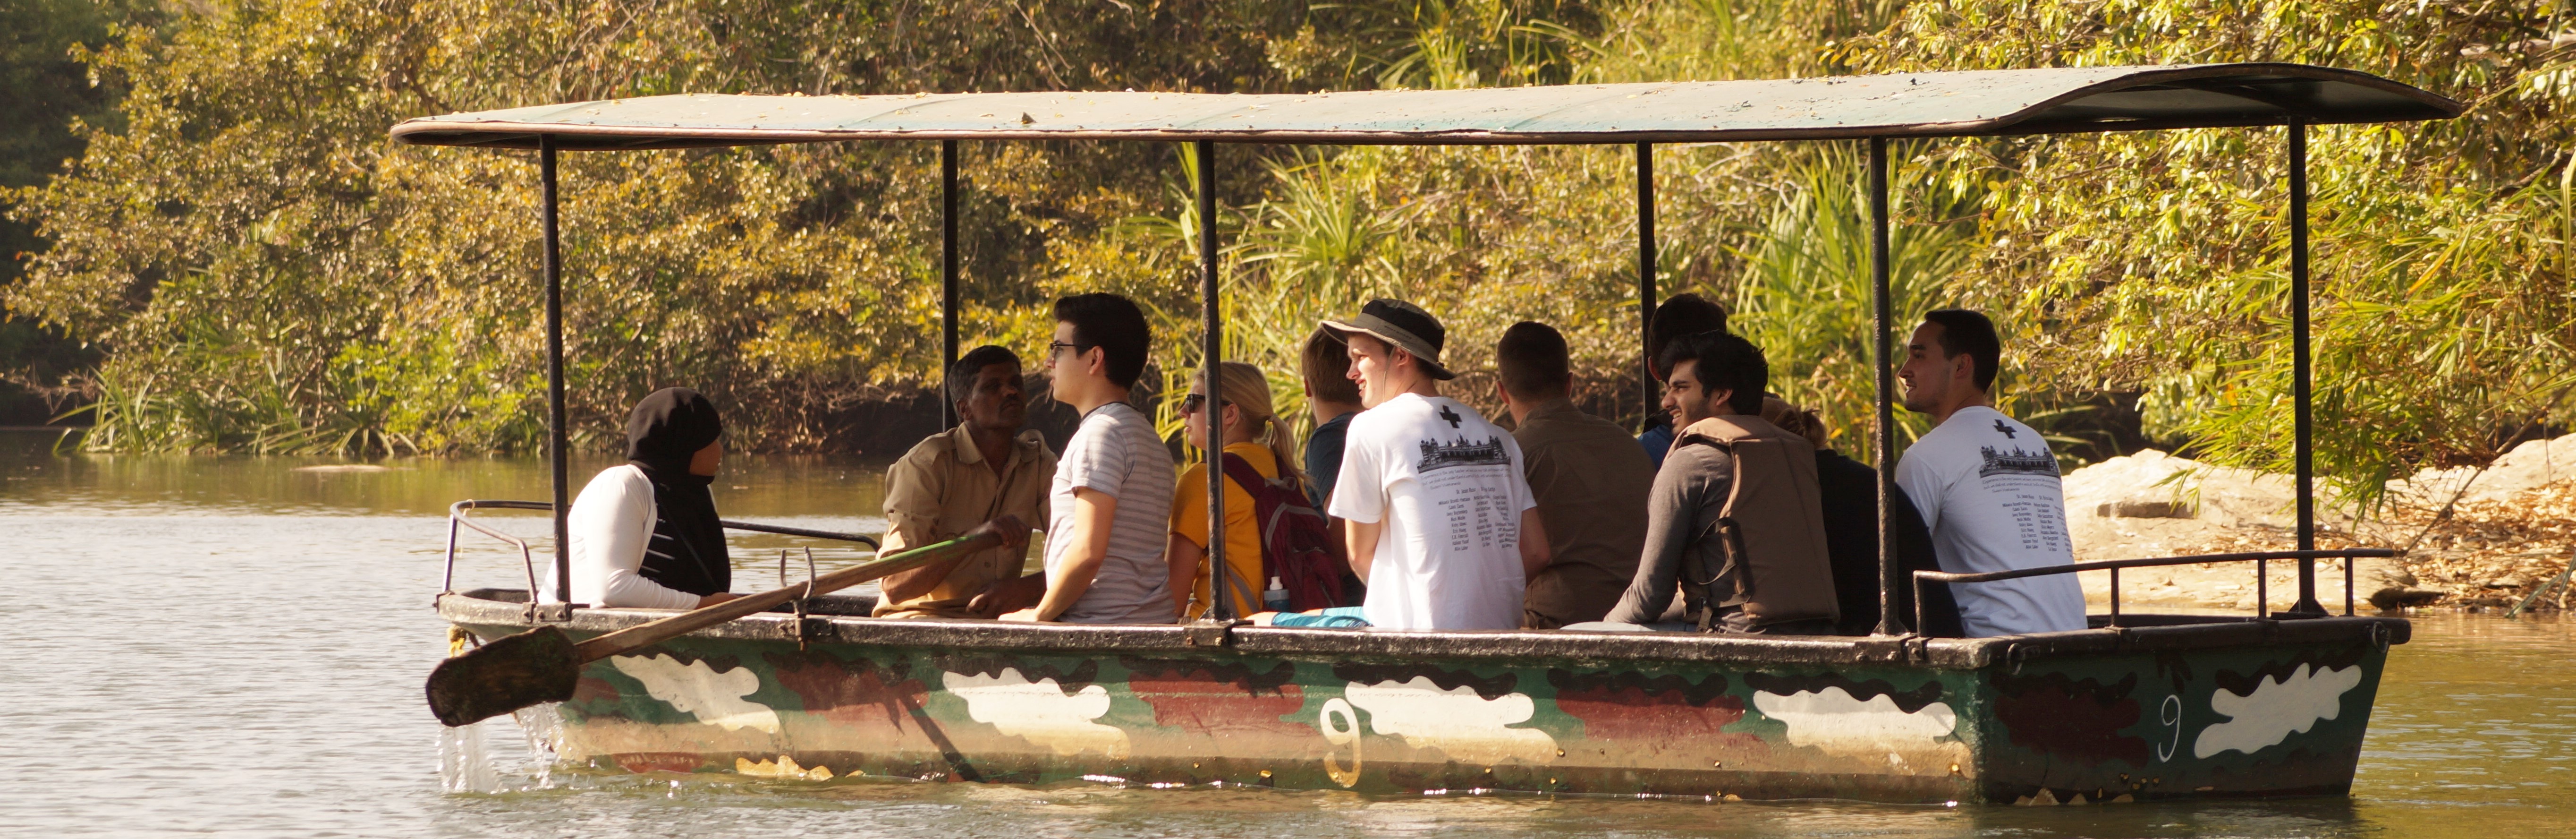 Students on a boat while studying abroad